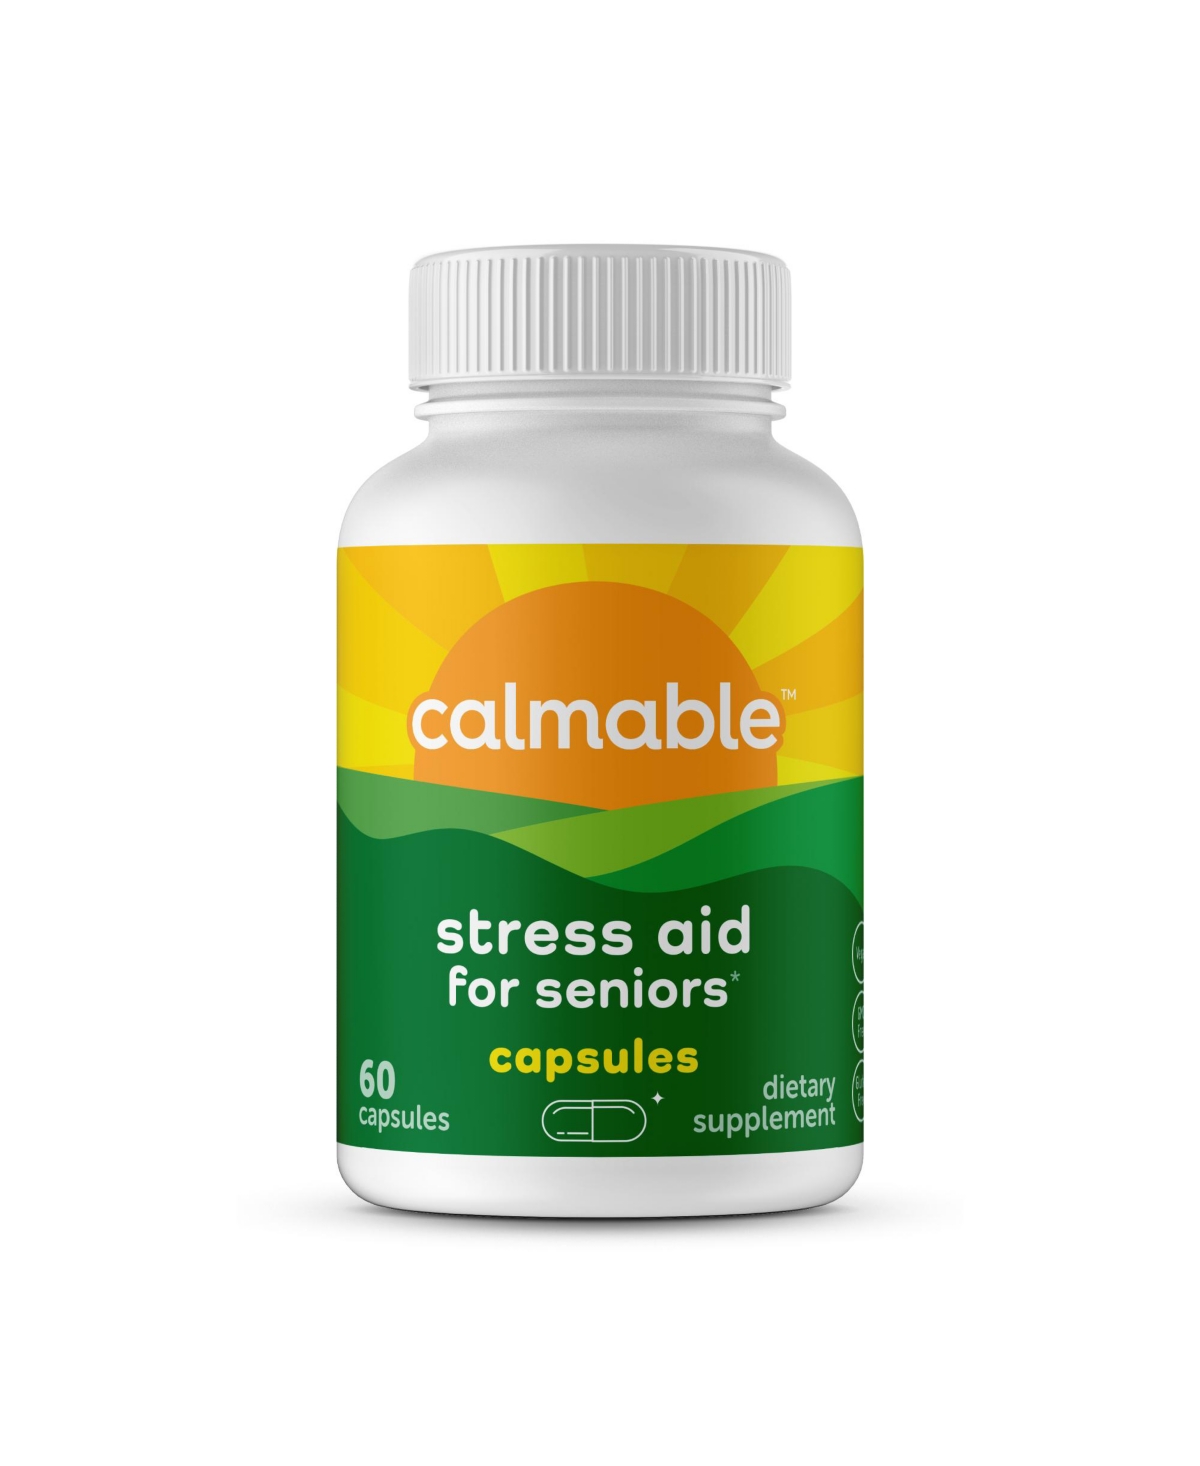 Stress Relief Aid for Seniors Capsules - Stress Relief - Feel Happy, Calm, Focused and Relaxed - 60 Capsules - Open Miscellaneous